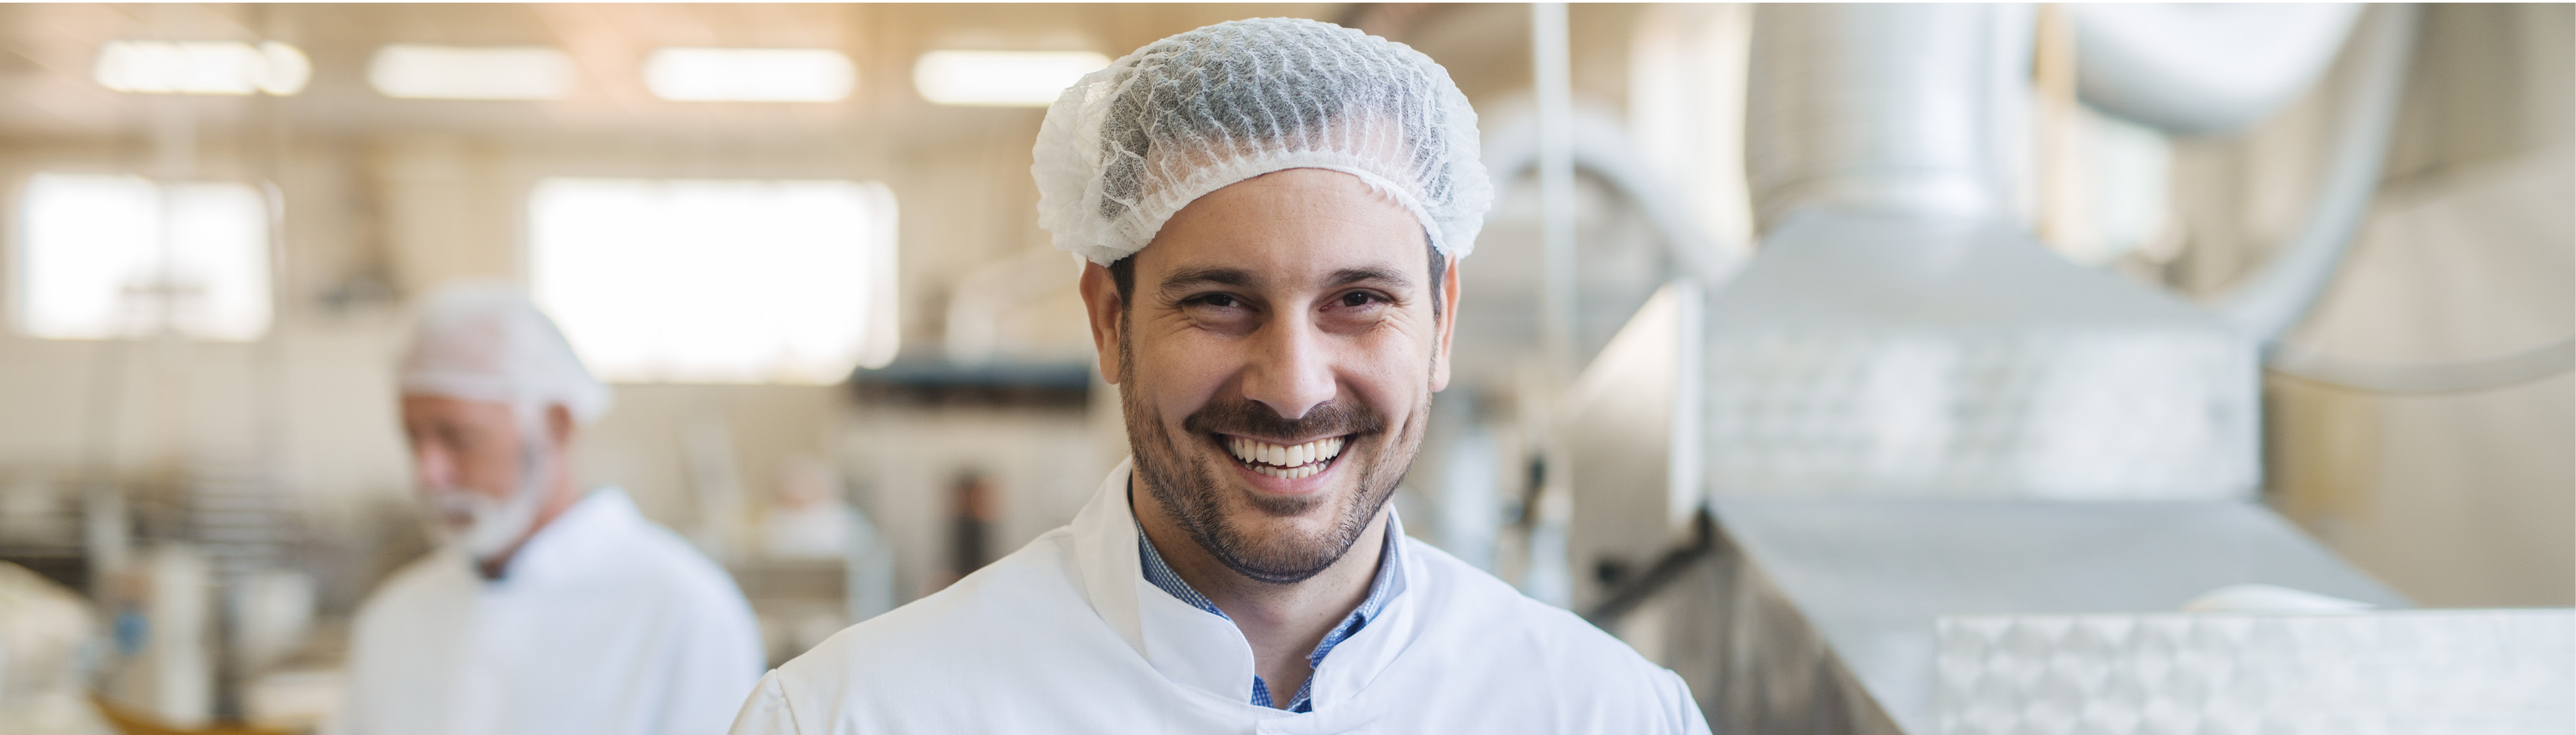 Smiling man in a food factory